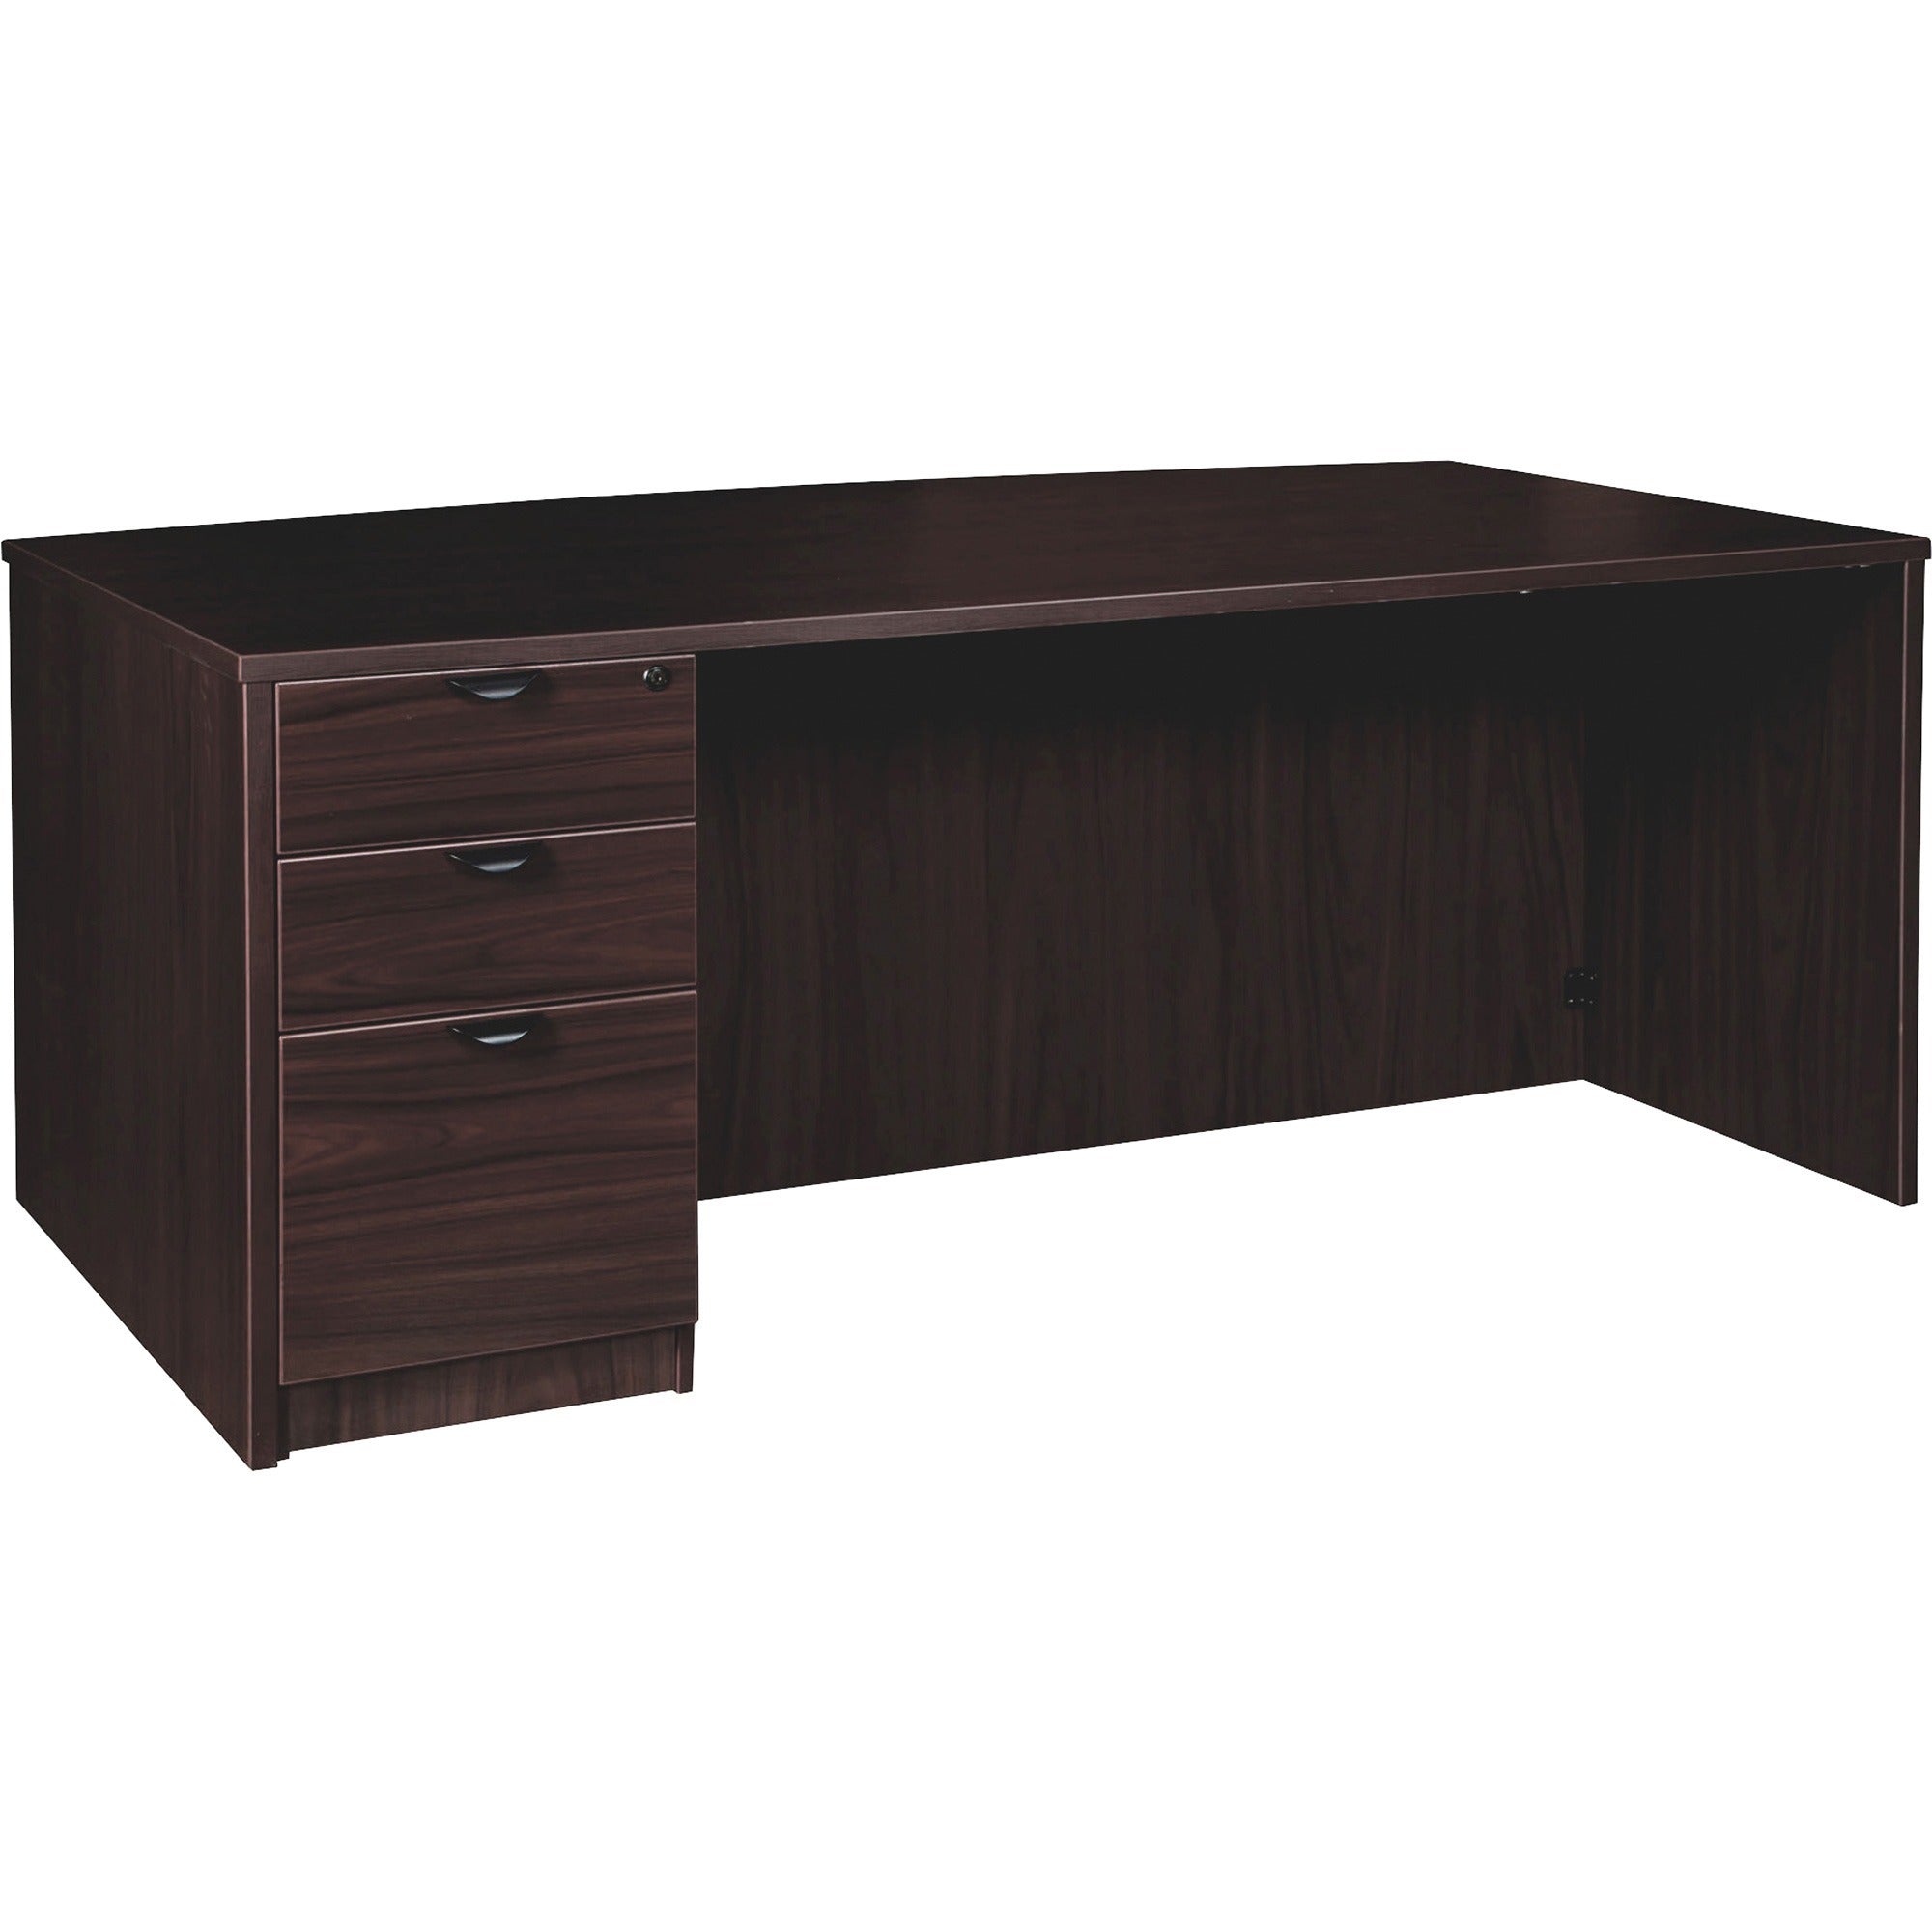 lorell-prominence-20-bowfront-left-pedestal-desk-1-top-72-x-4229-3-x-file-box-drawers-single-pedestal-on-left-side-band-edge-material-particleboard-finish-espresso-laminate-thermofused-melamine-tfm_llrpd4272lspbes - 1